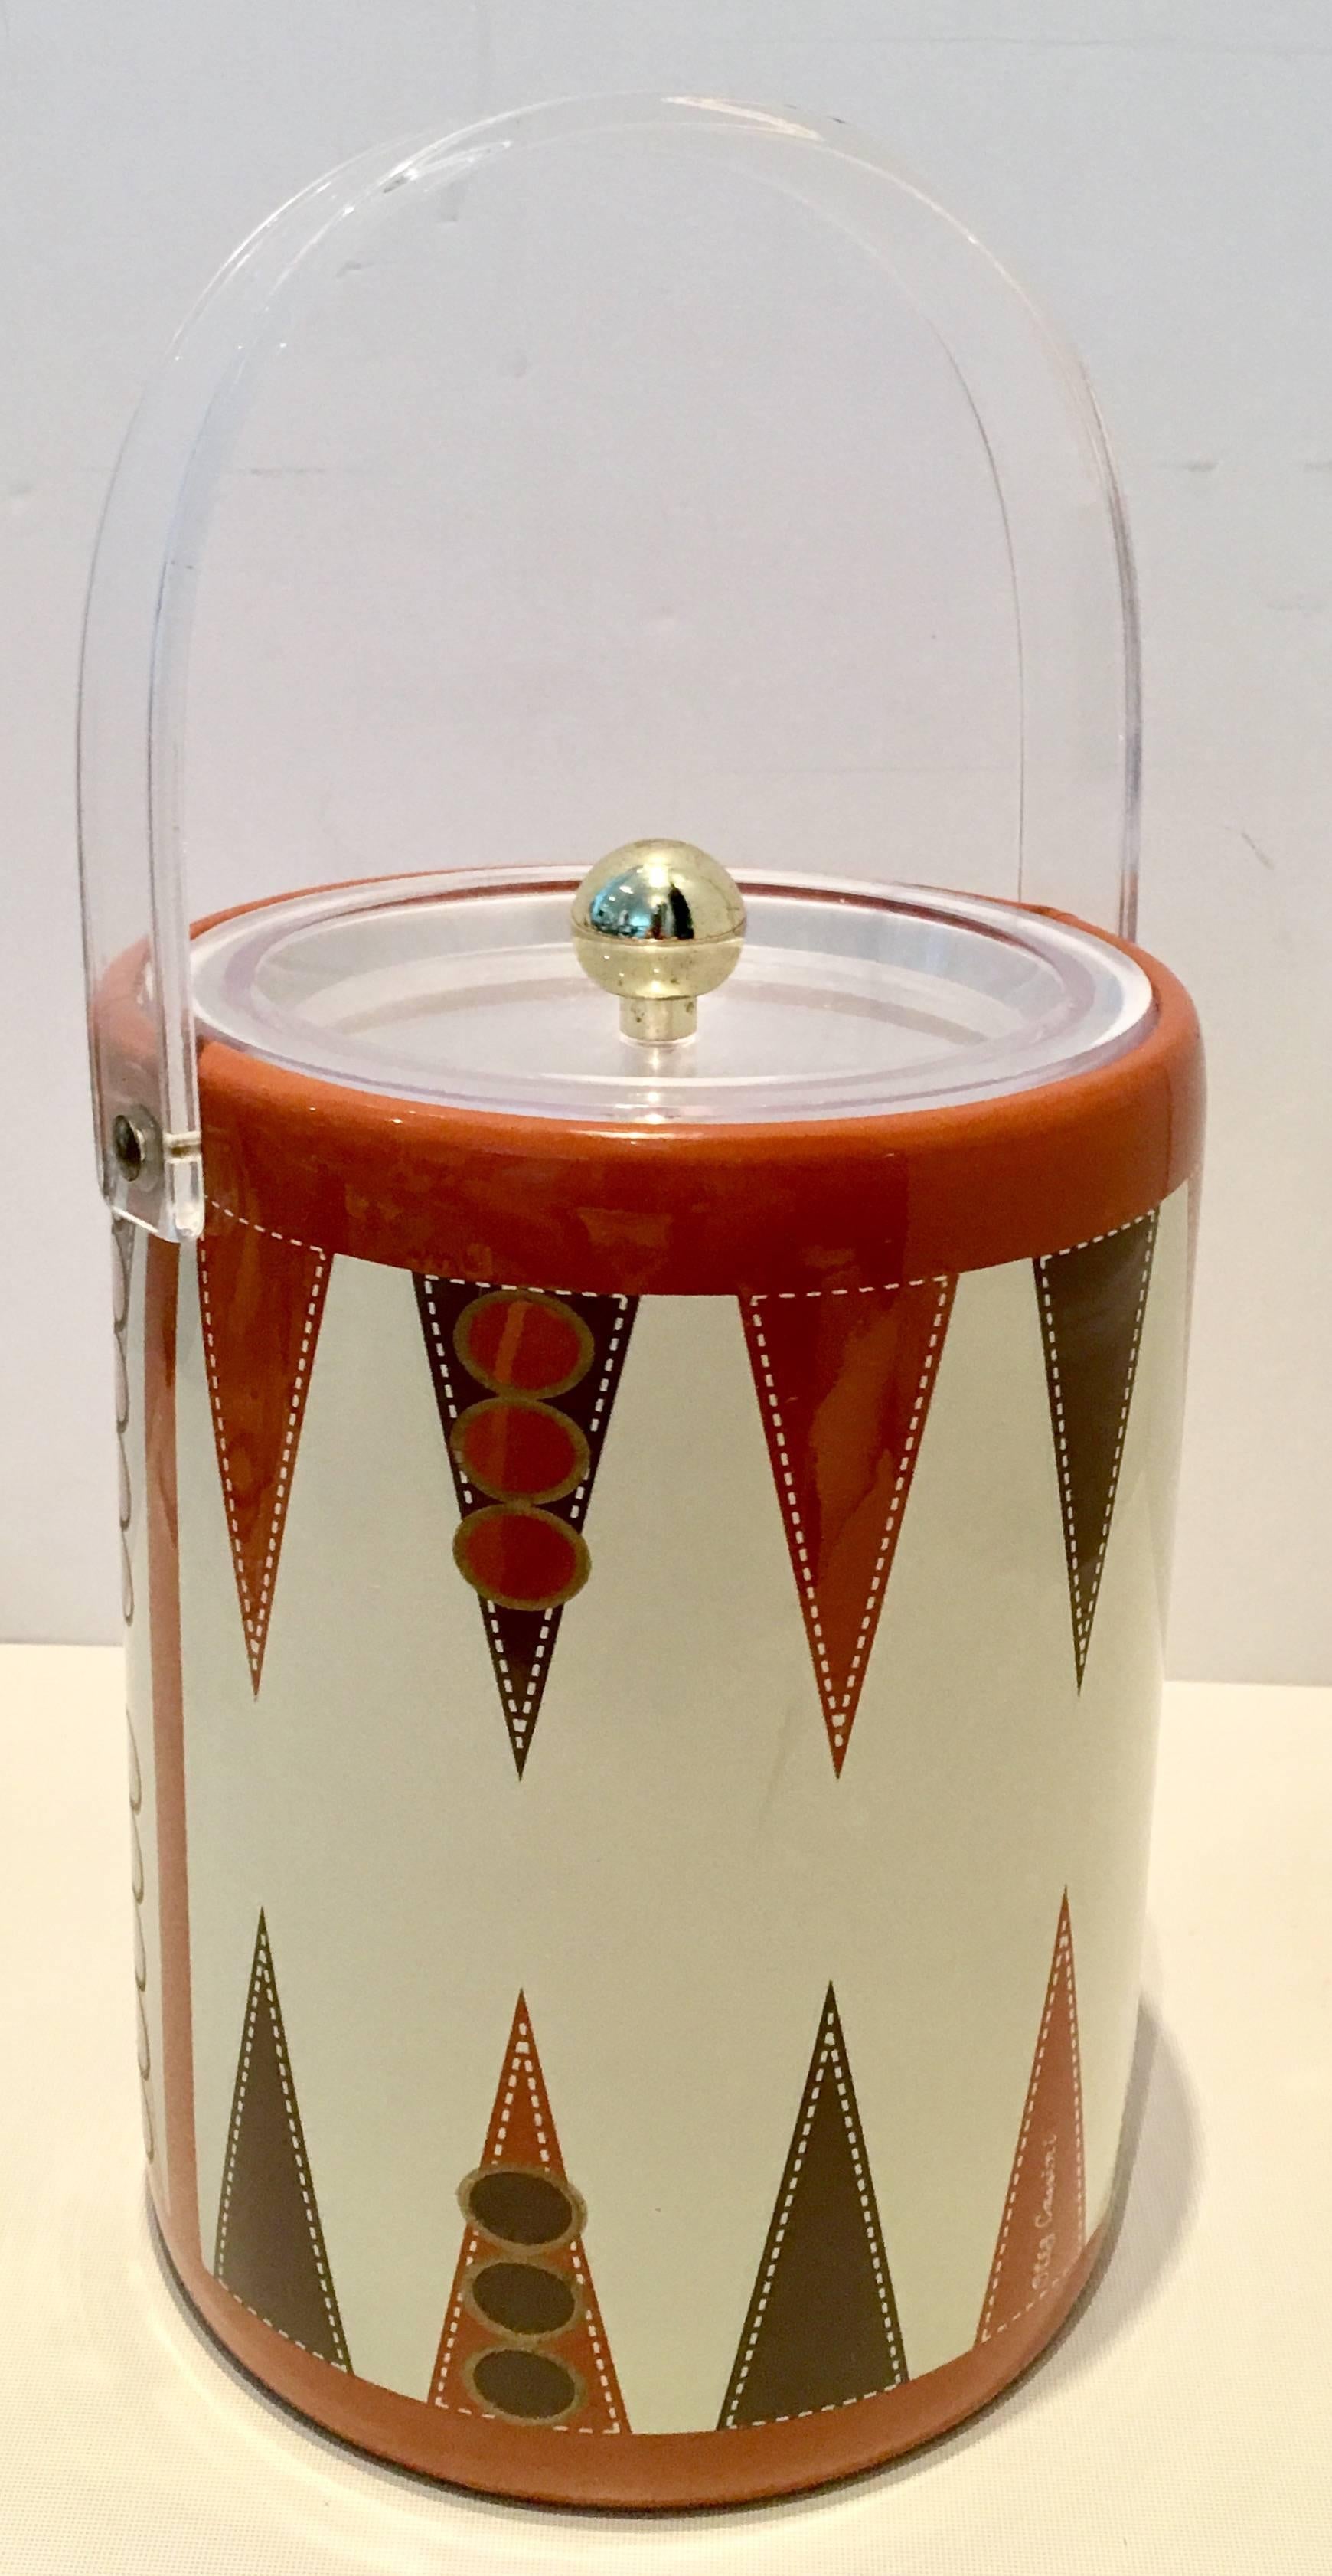 1970s Backgammon motif vinyl and Lucite thermal ice bucket by, Oleg Cassini.
Features a cream ground with burnt orange, brown, white and gold backgammon board motif. The handle is made of thick Lucite as well as the lid and features brass hardware.